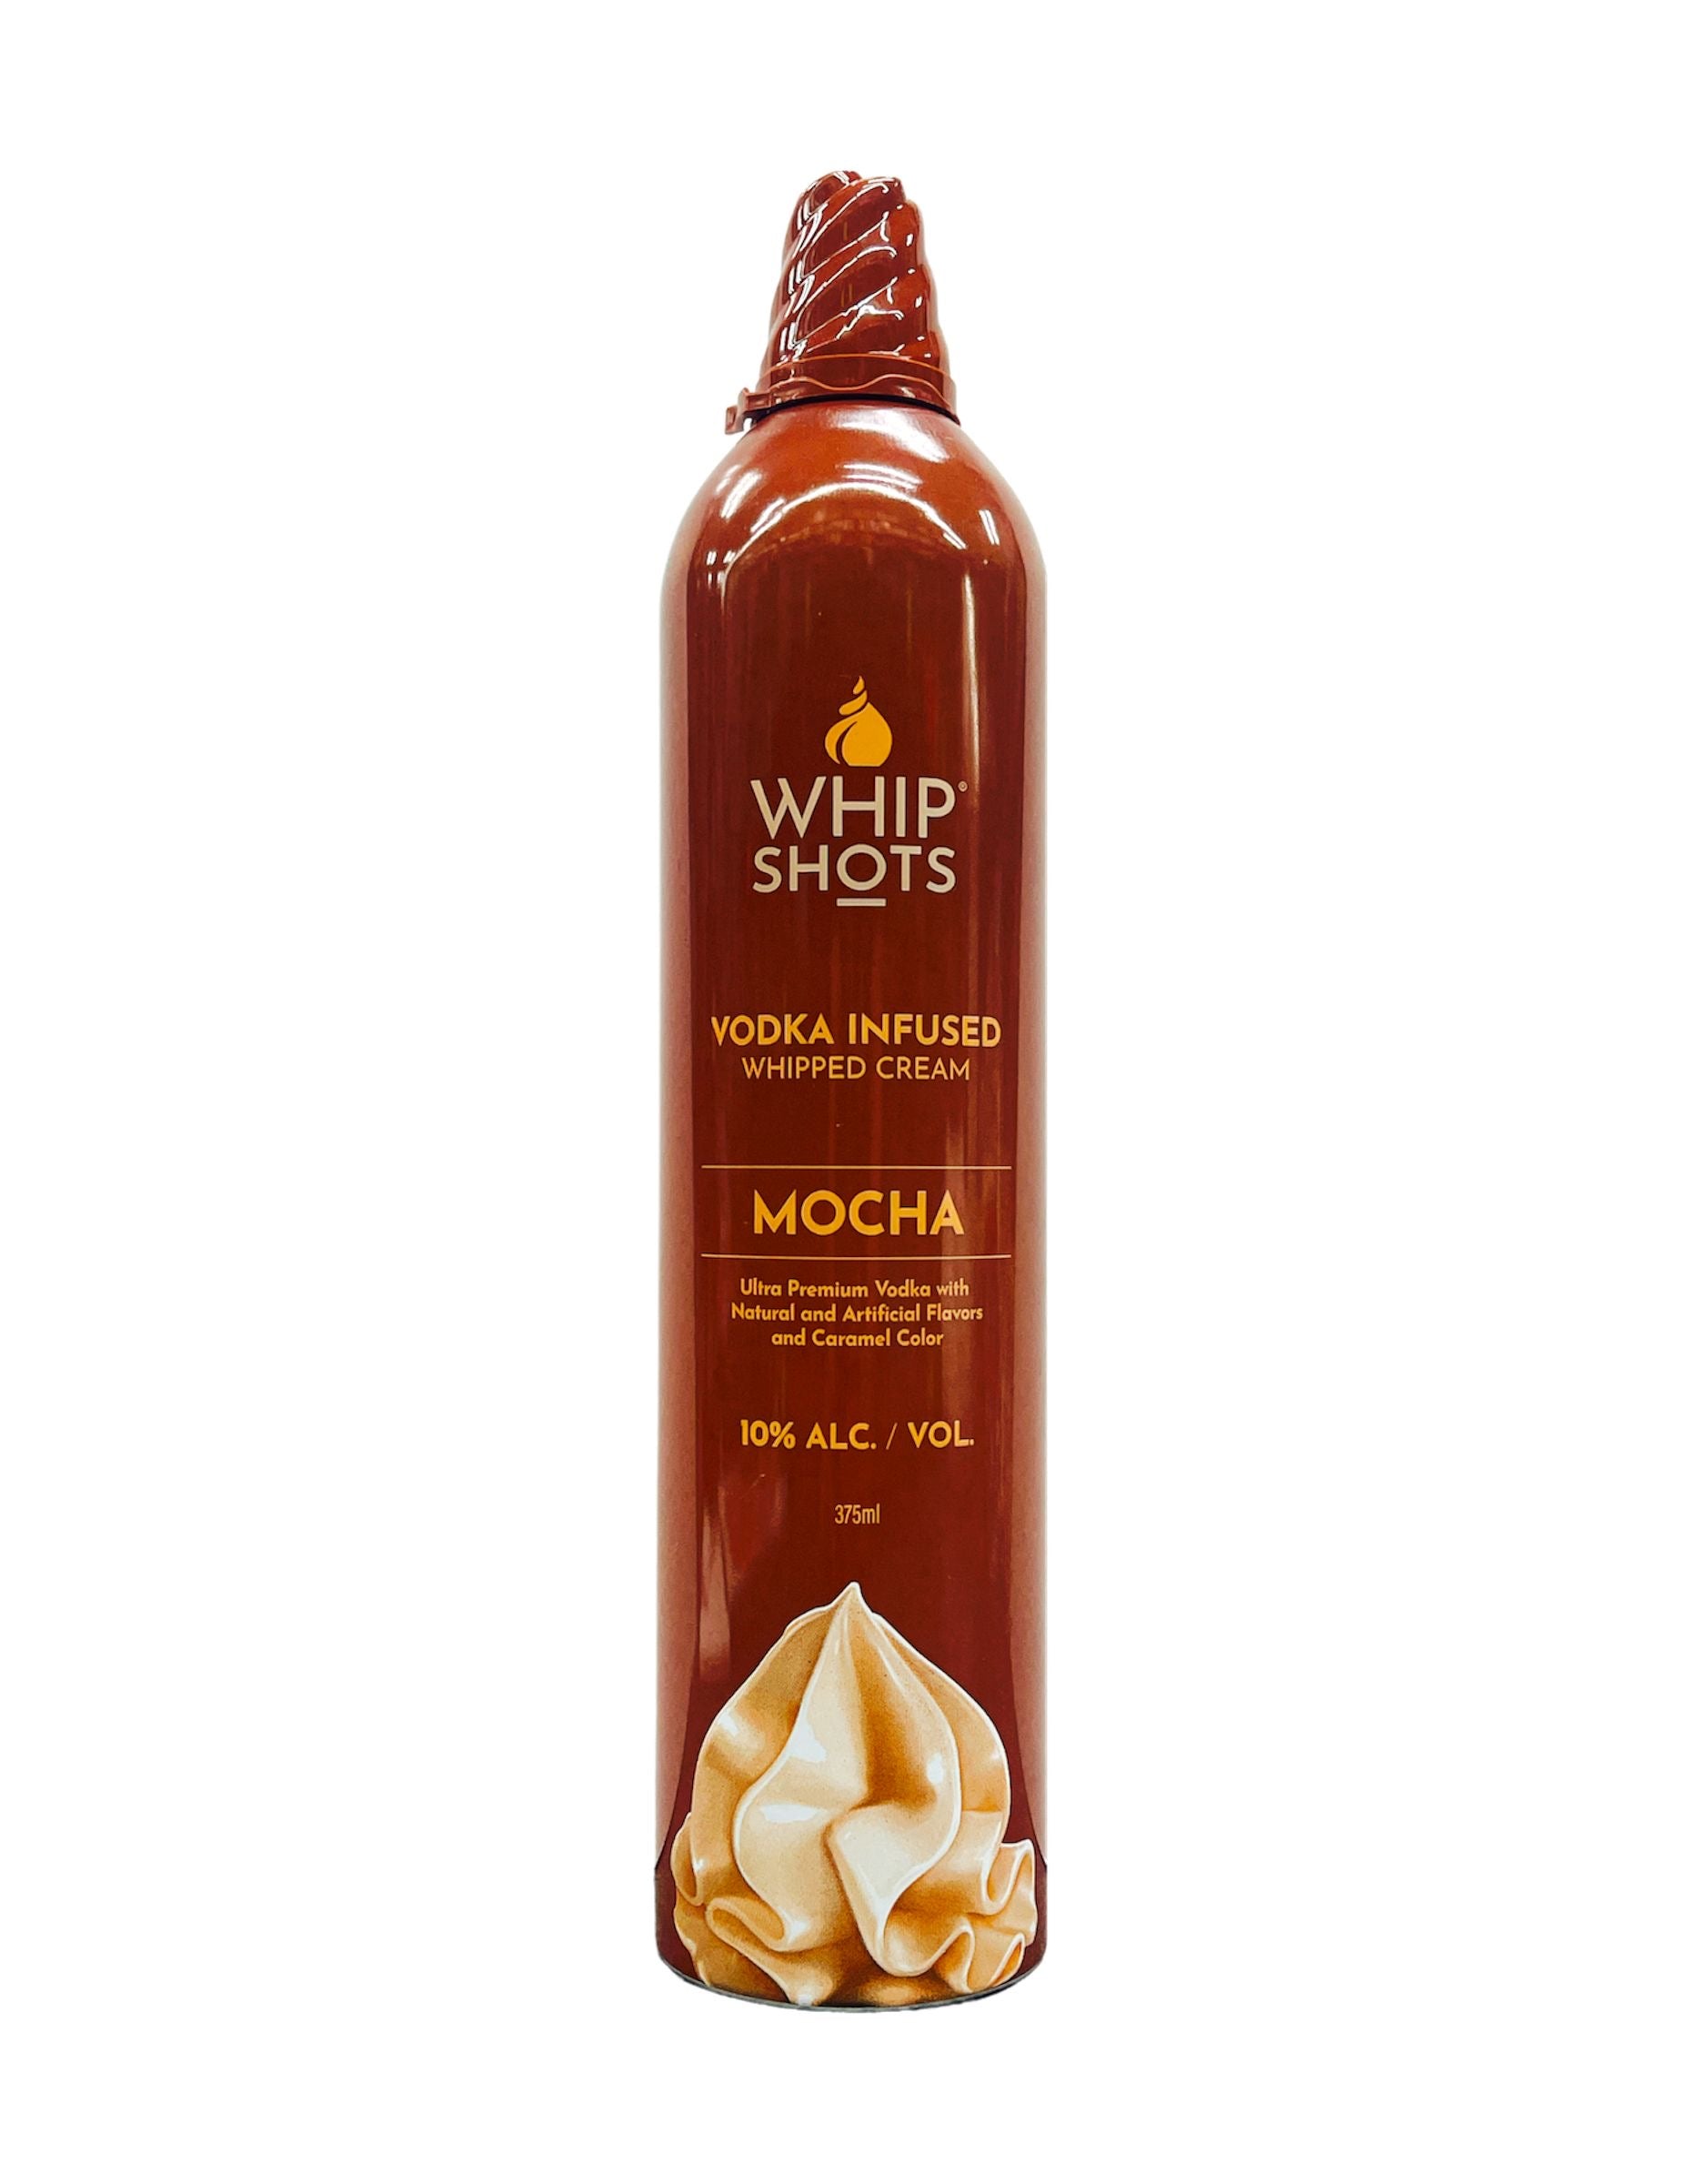 Whip Shots Vodka Infused Mocha Whipped Cream By Cardi B